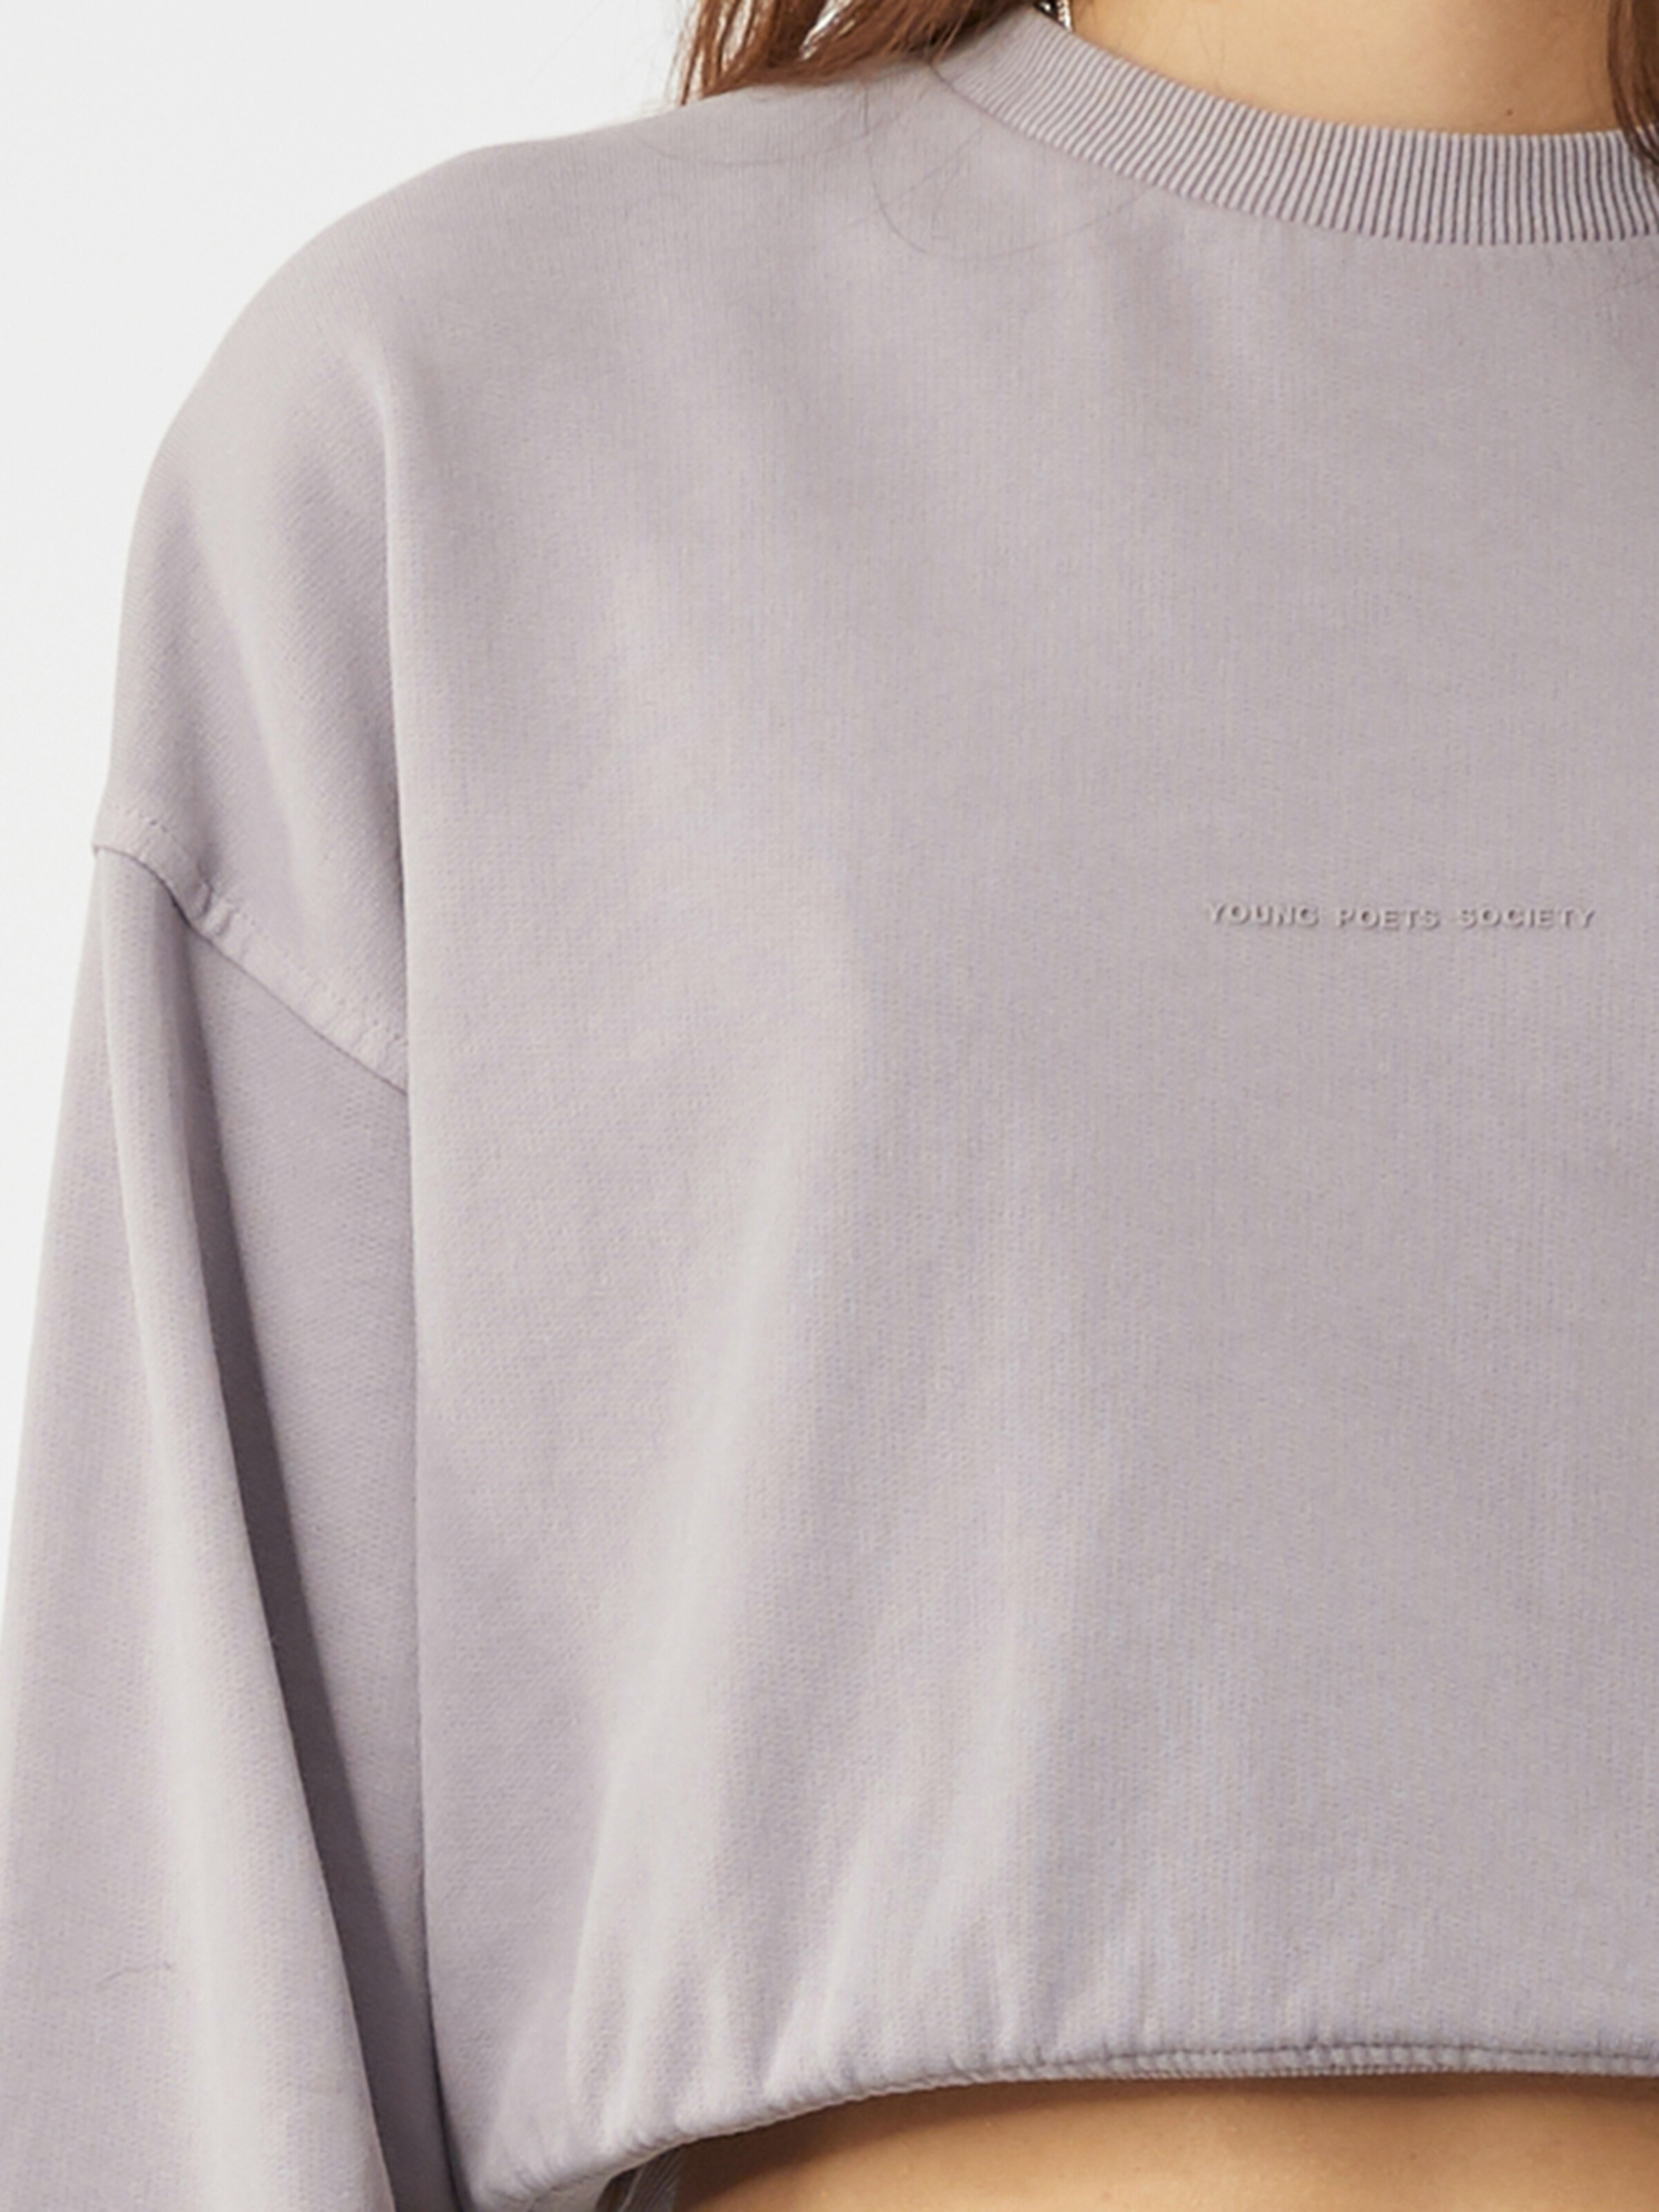 Femme Sweat-shirt Carla Young Poets Society en Lilas 